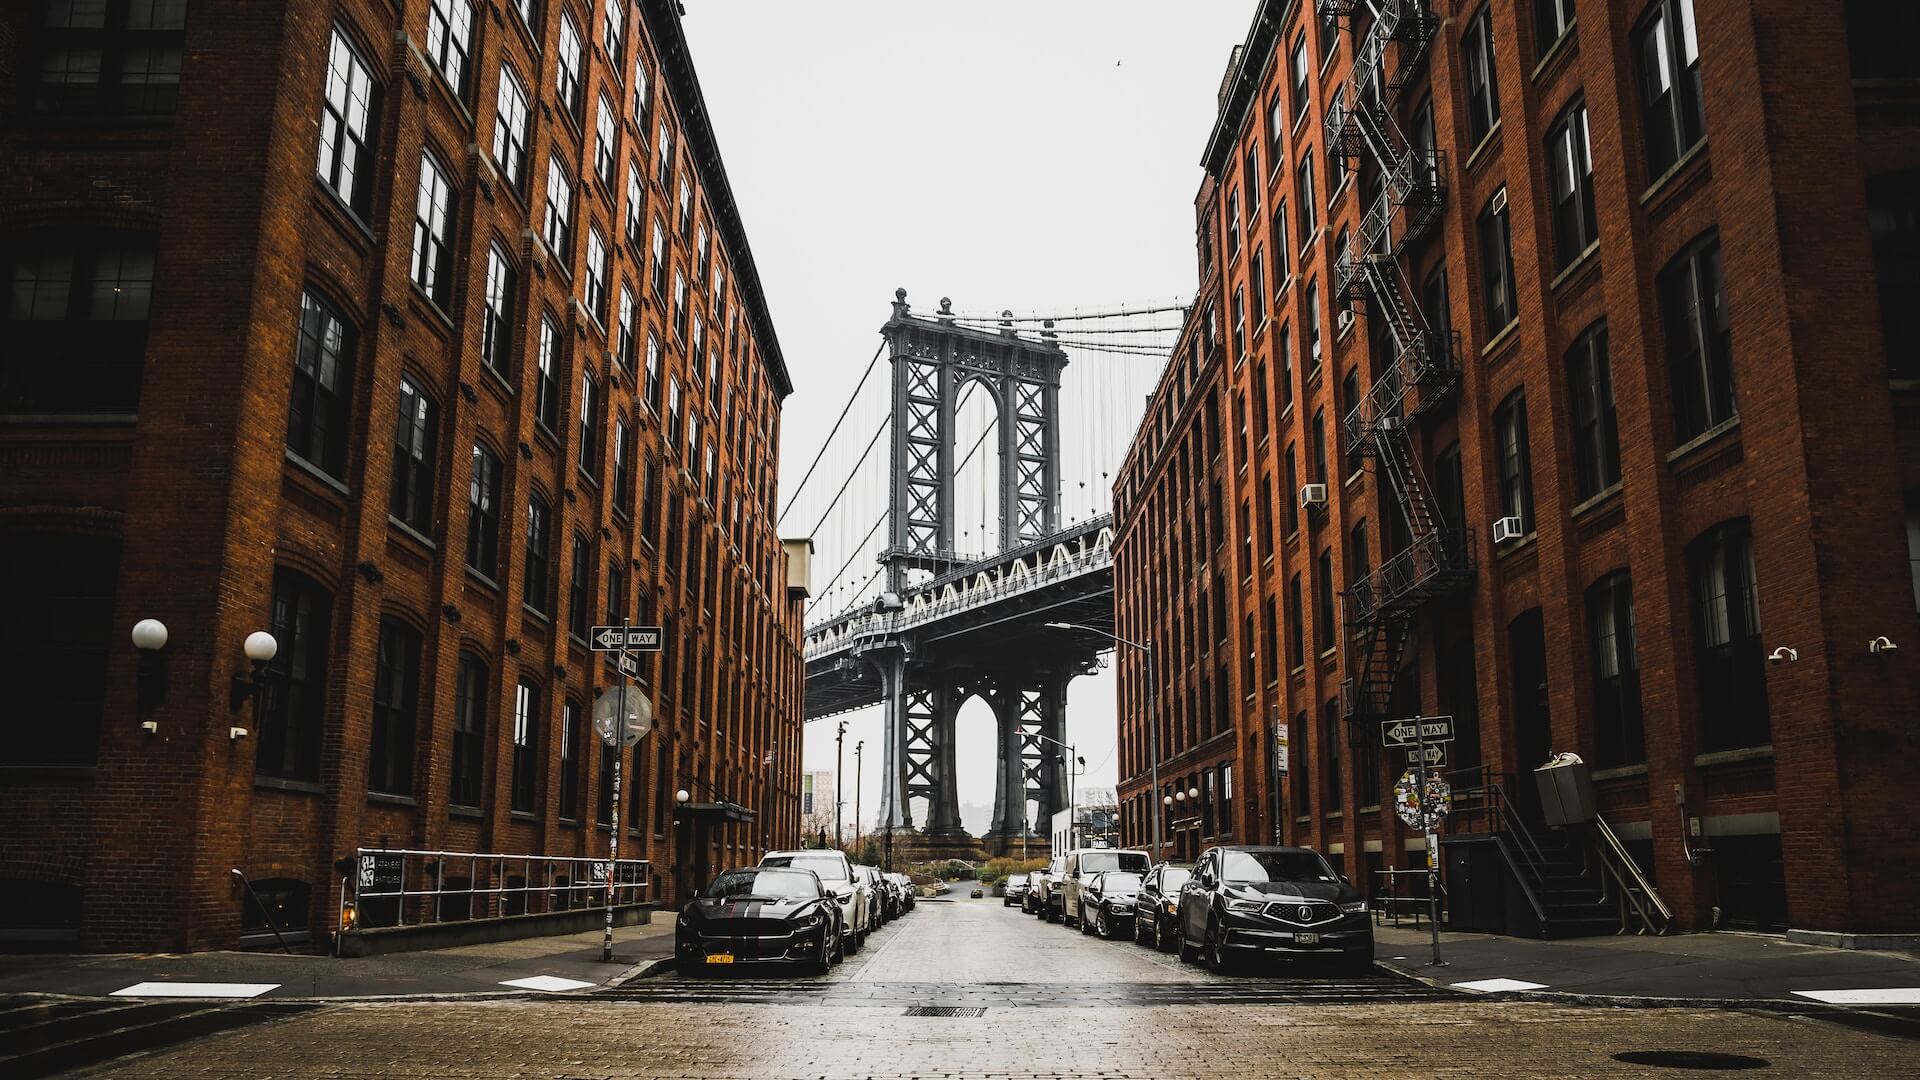 Brick buildings on the left and right side of the image give way to a view of the Brooklyn Bridge NYC